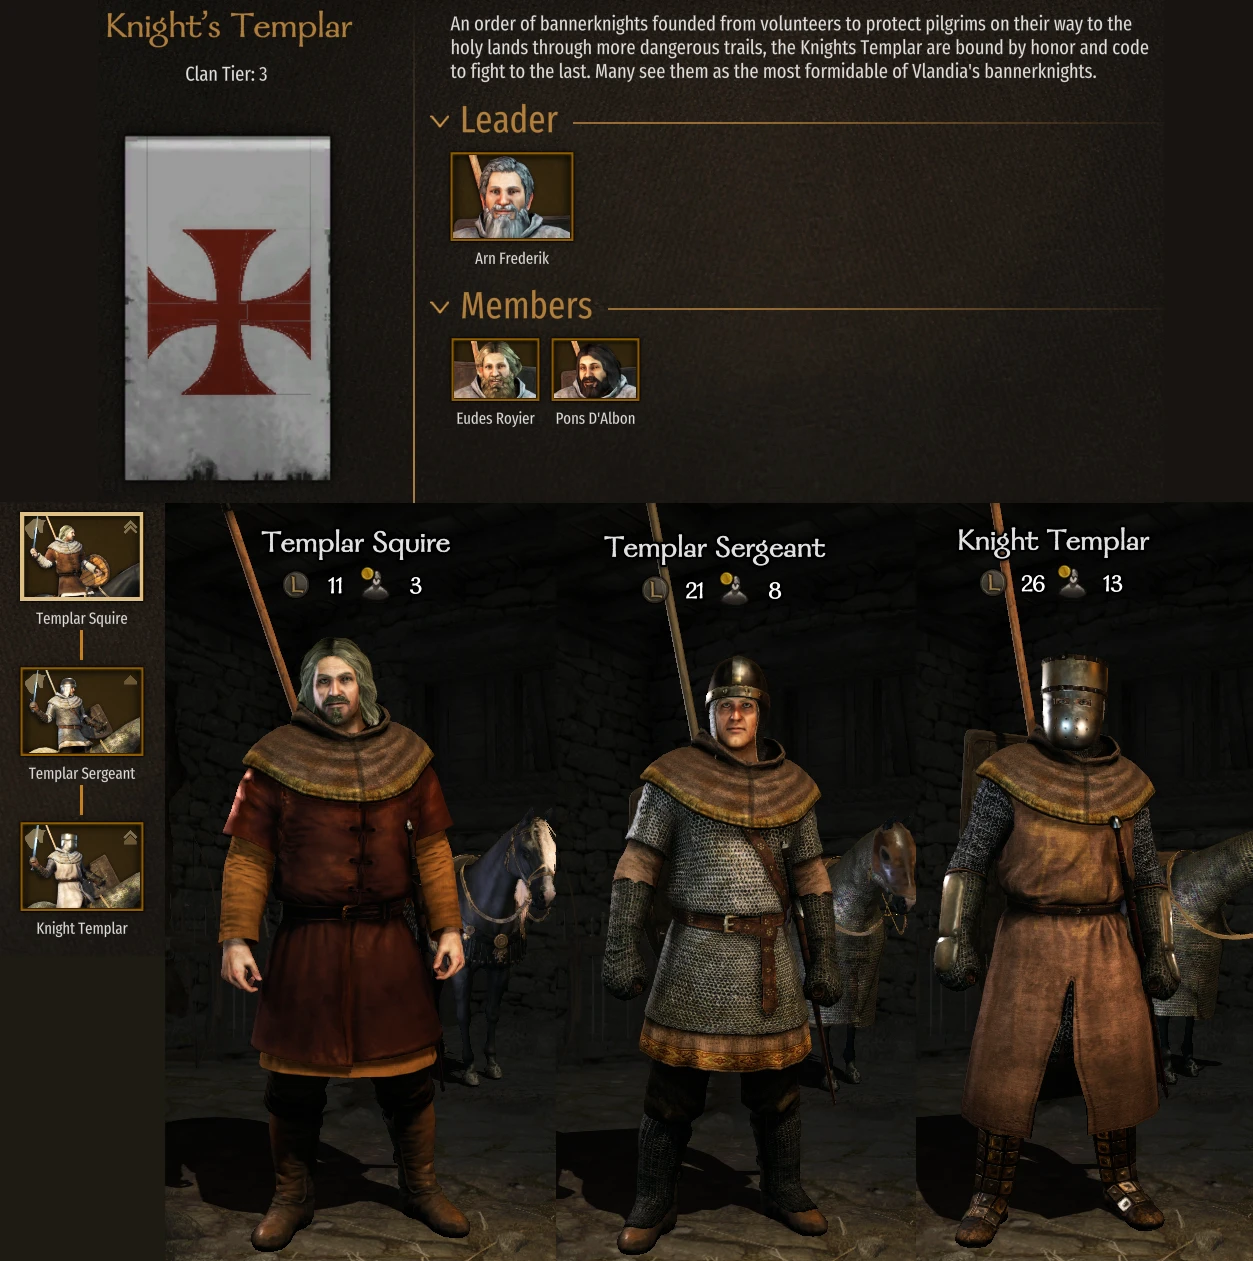 mount and blade bannerlord mods nexus